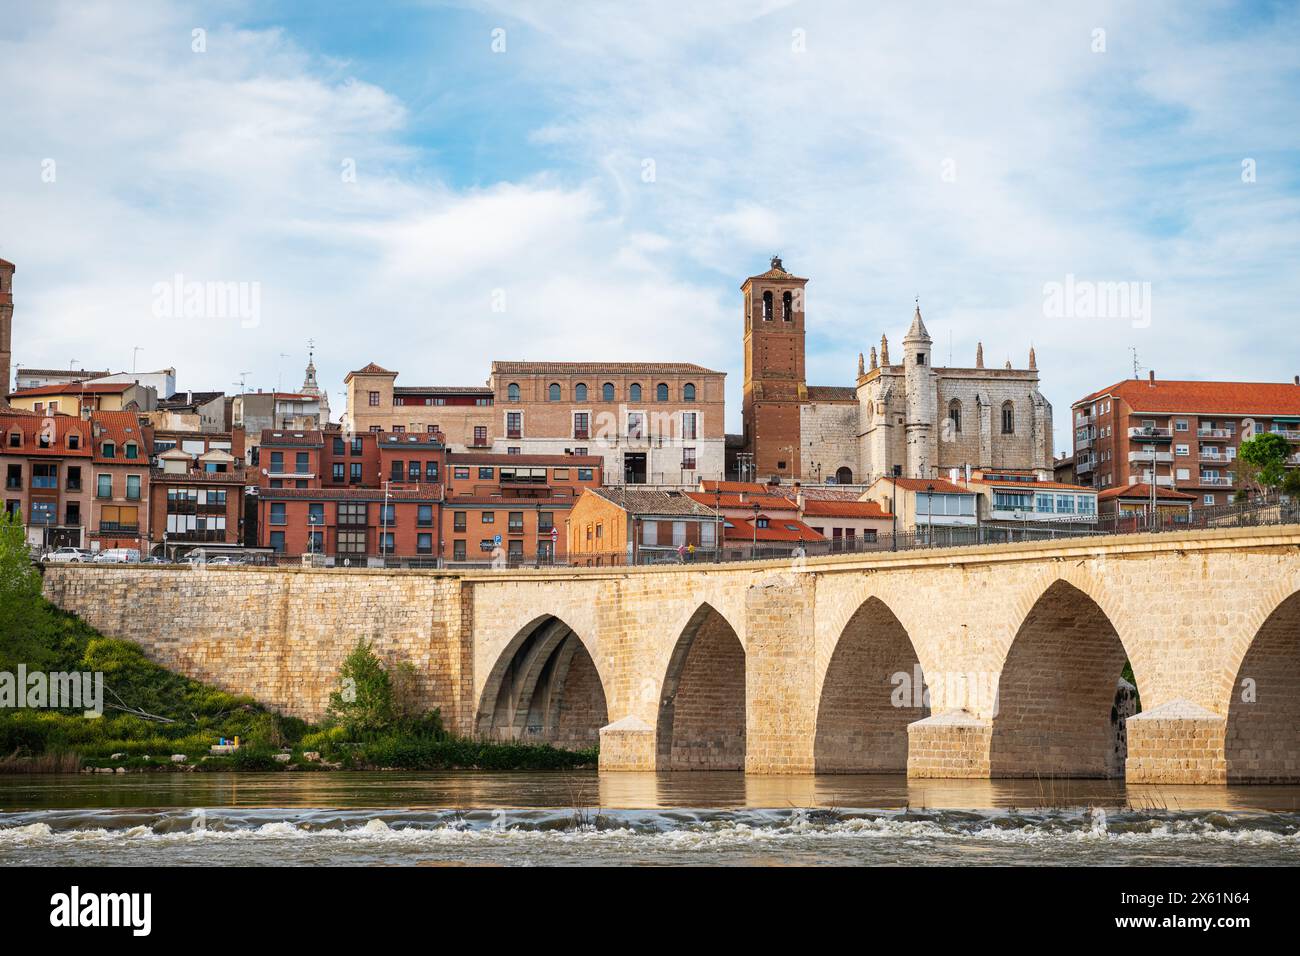 Panorama view of the medieval bridge and city of Tordesillas in Valladolid by the Douro River. Stock Photo